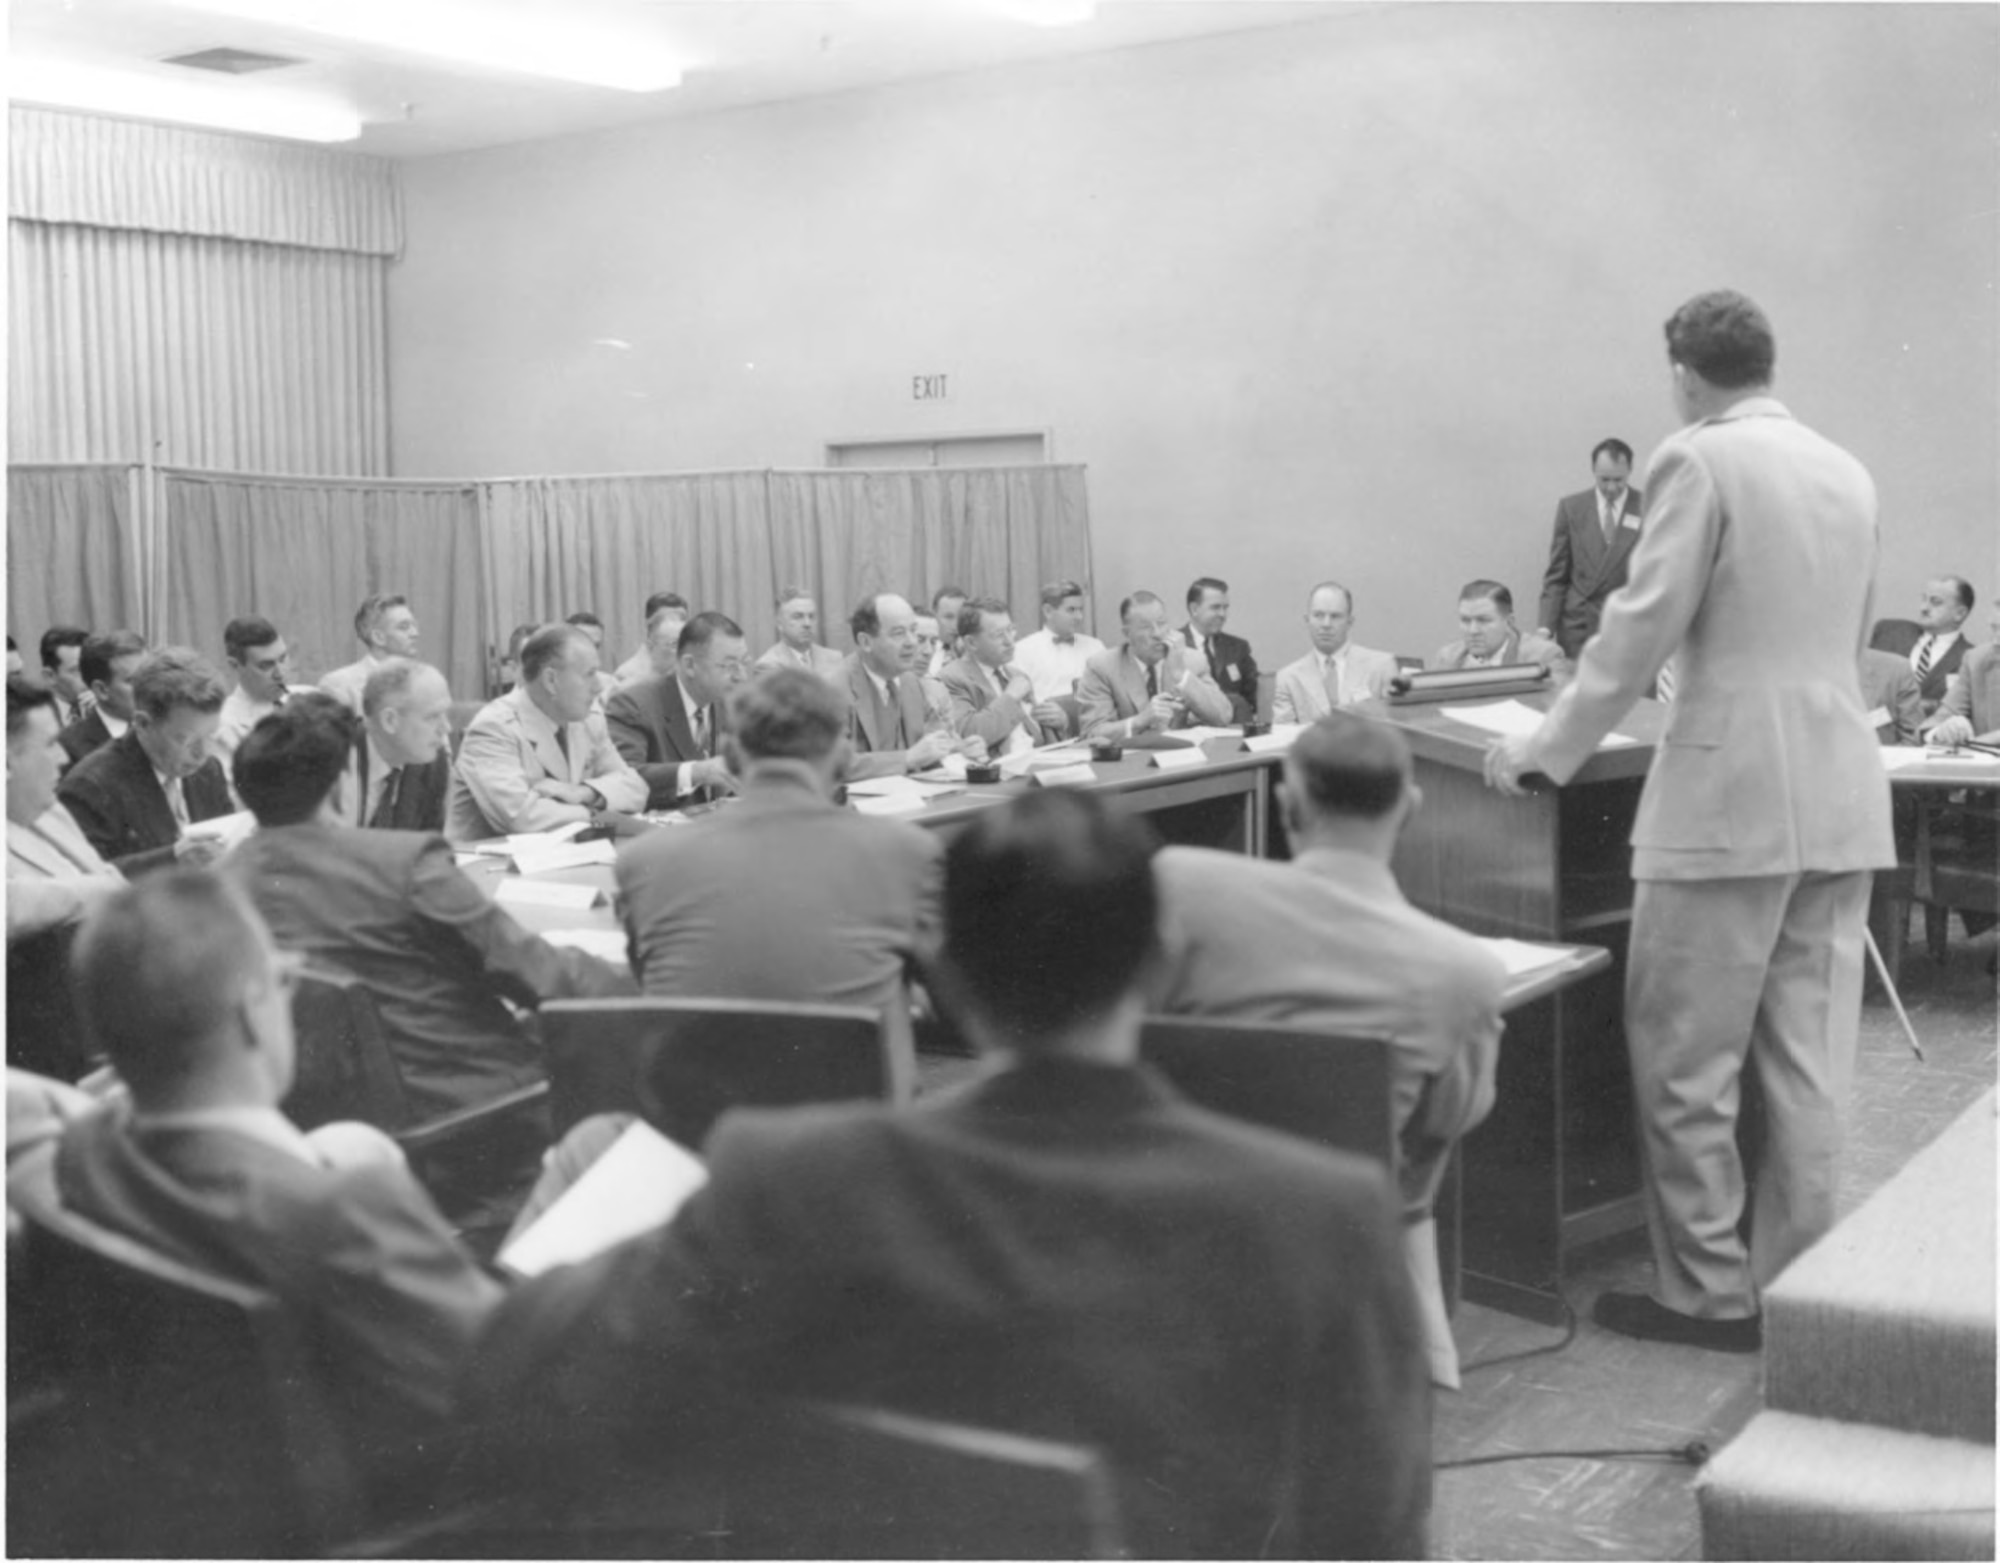 Then-Brig. Gen. Bernard Schriever address a session of the Von Neumann Committee at the Western Development Division's Arbor Vitae Complex in Inglewood, Calif. in the fall of 1955. The Committee had been reconstituted as the Atlas Scientific Advisory Committee. Facing Gen. Schriever in the front row (left to right) are George McRae of Sandia Corporation, aviation legend Charles Lindbergh, Gen. Thomas Power, commander of the Air Research and Development Command, Assistant Secretary of the Air Force Trevor Gardner, Committee Chairman John von Neumann, Col. Harold Norton, H. Guyford Stever of MIT and Clark Millikan of Caltech (U.S. Air Force photo)